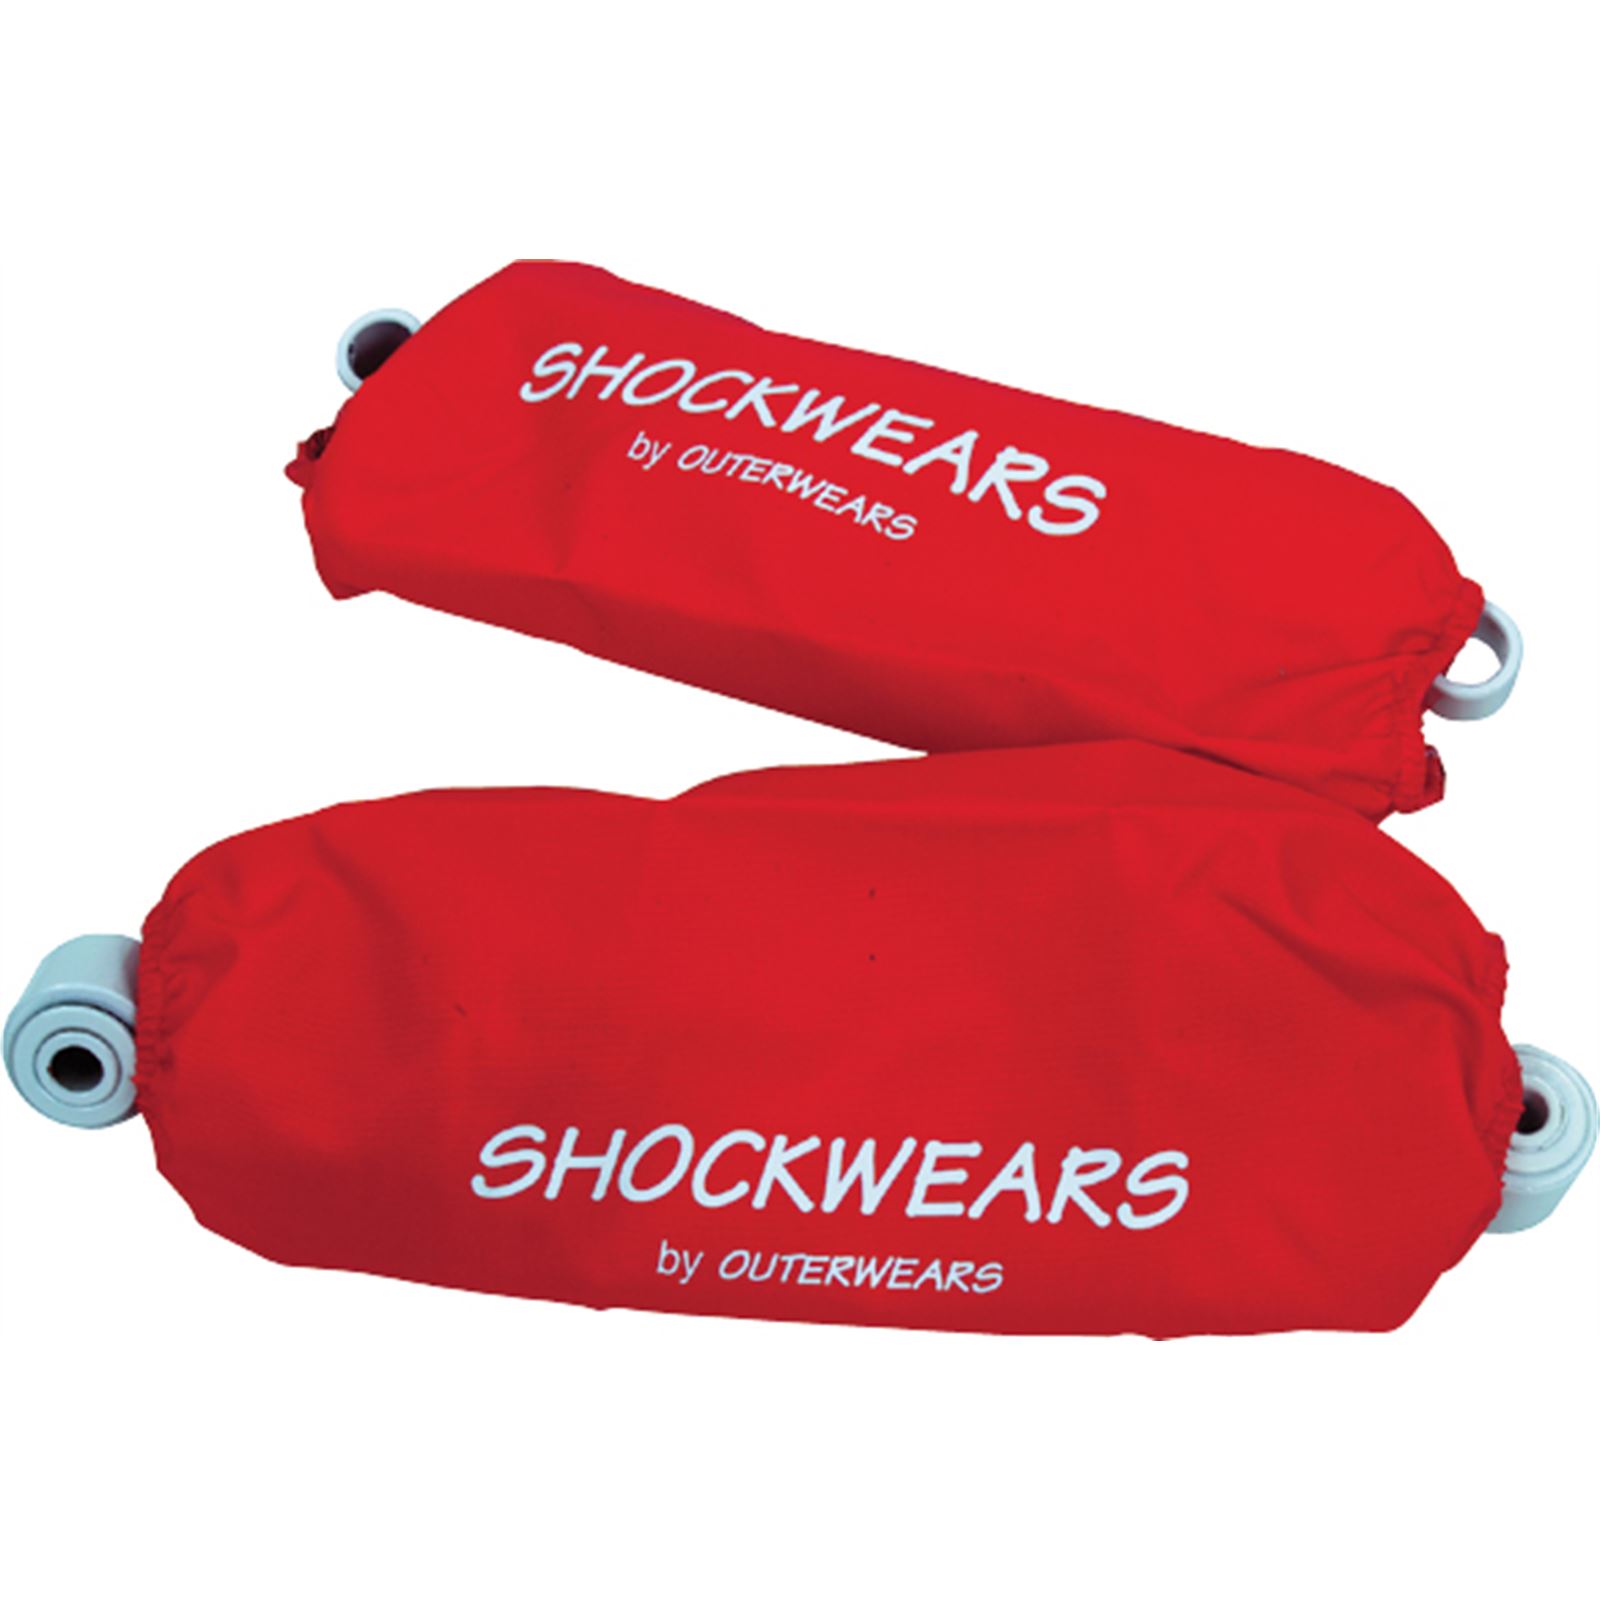 Outerwears Shockwears Cover